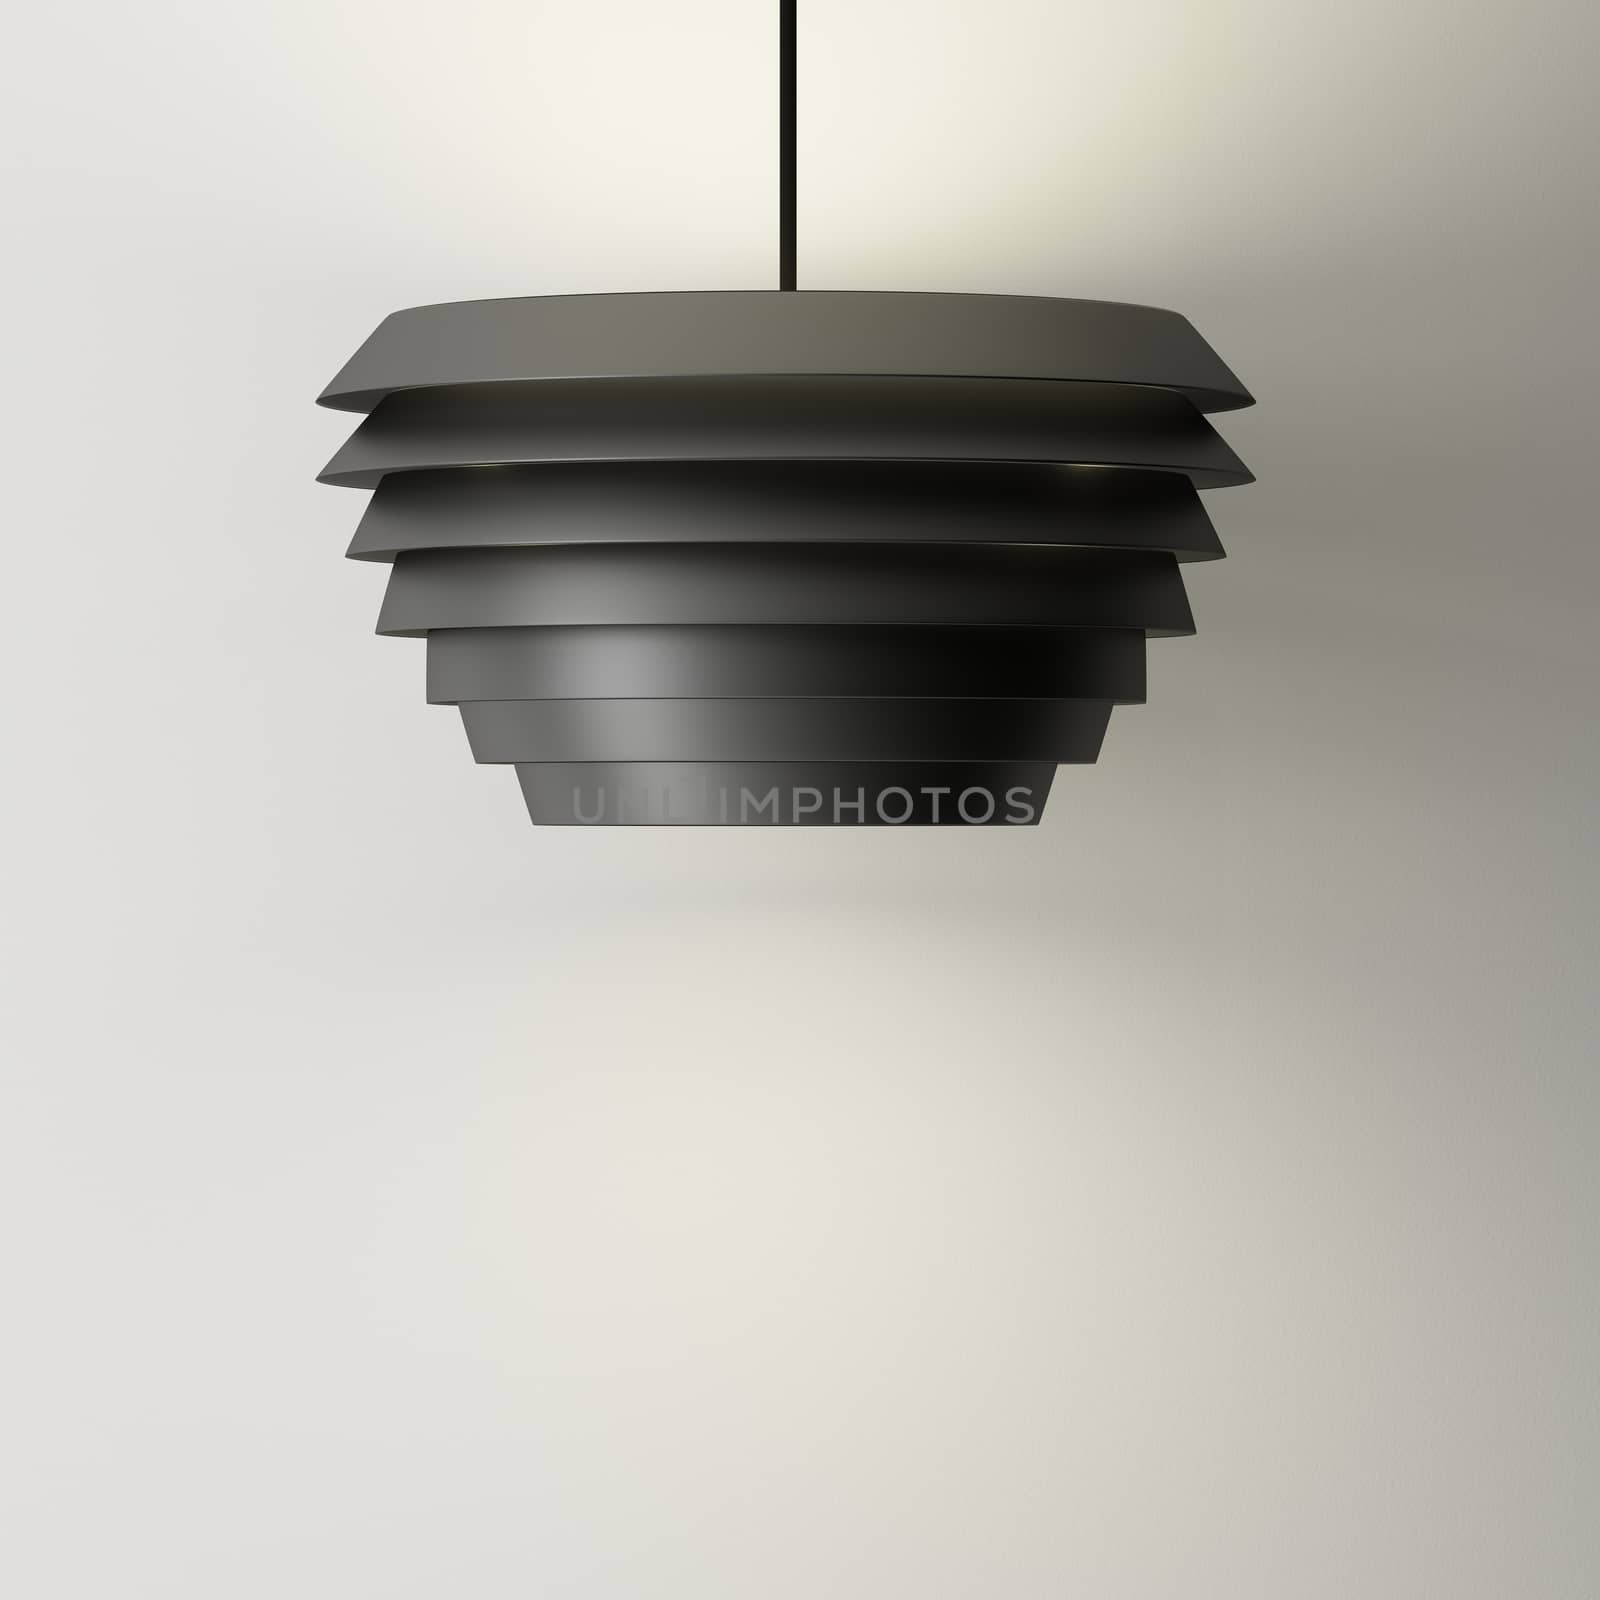 Black Lamp of decorated design and wall background